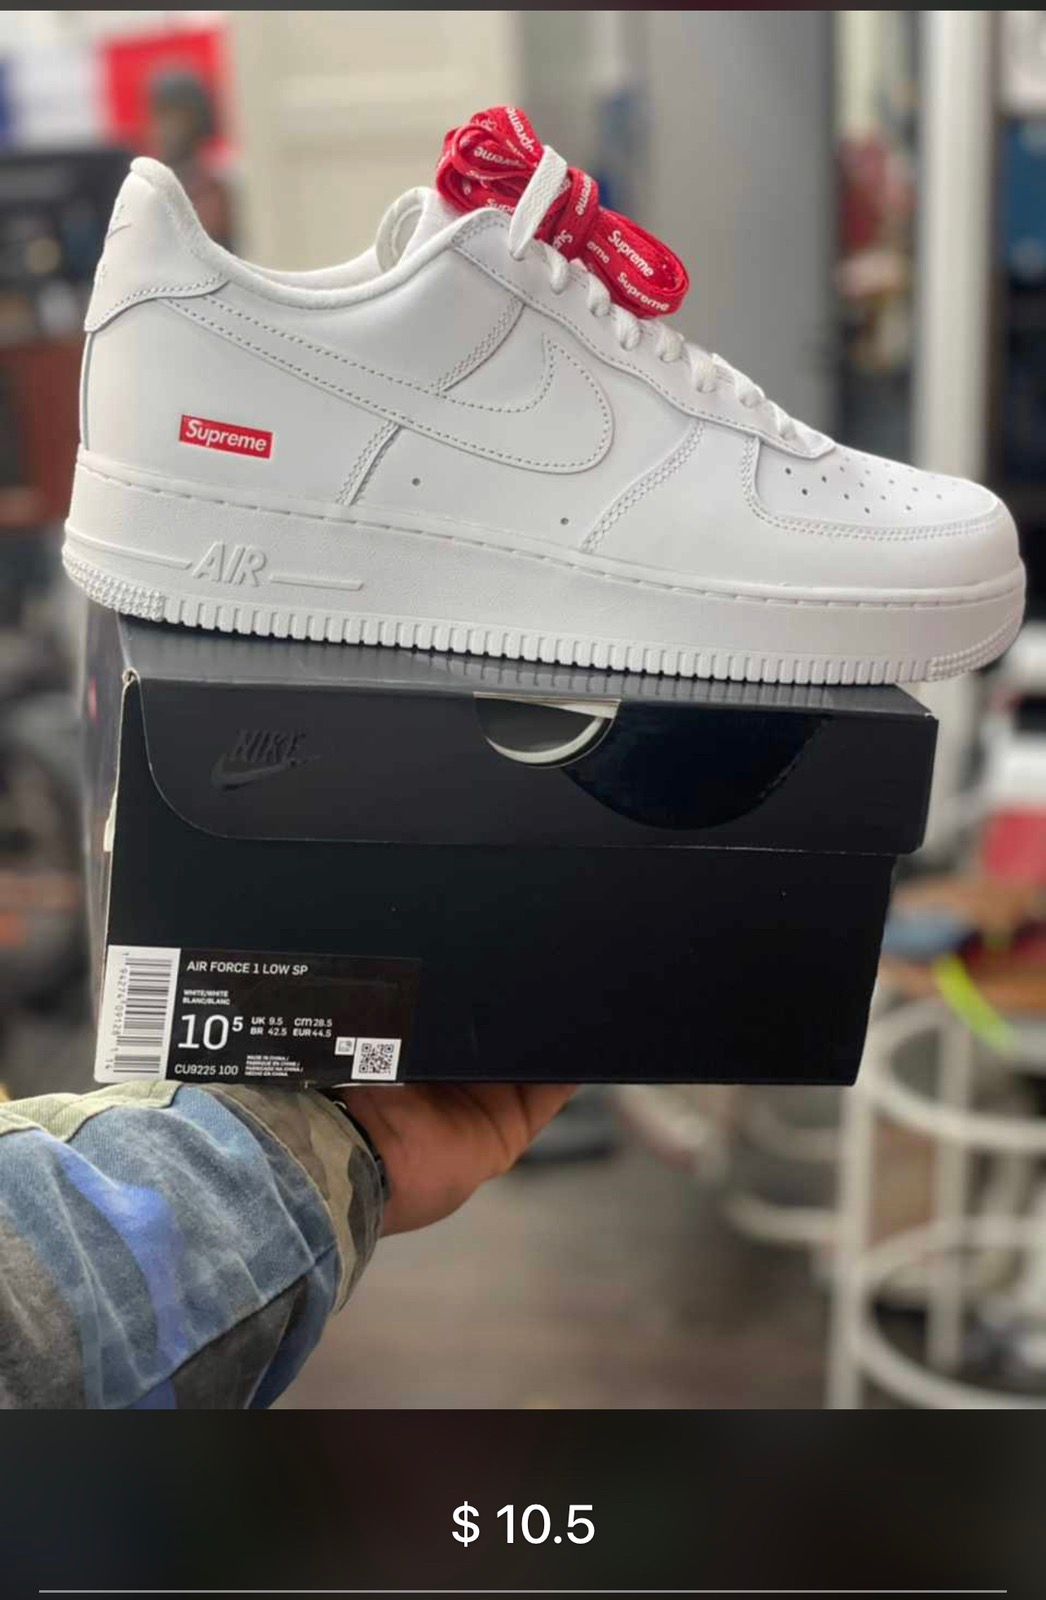 Pre-owned Nike X Supreme Air Force 1 Low Supreme Shoes In White